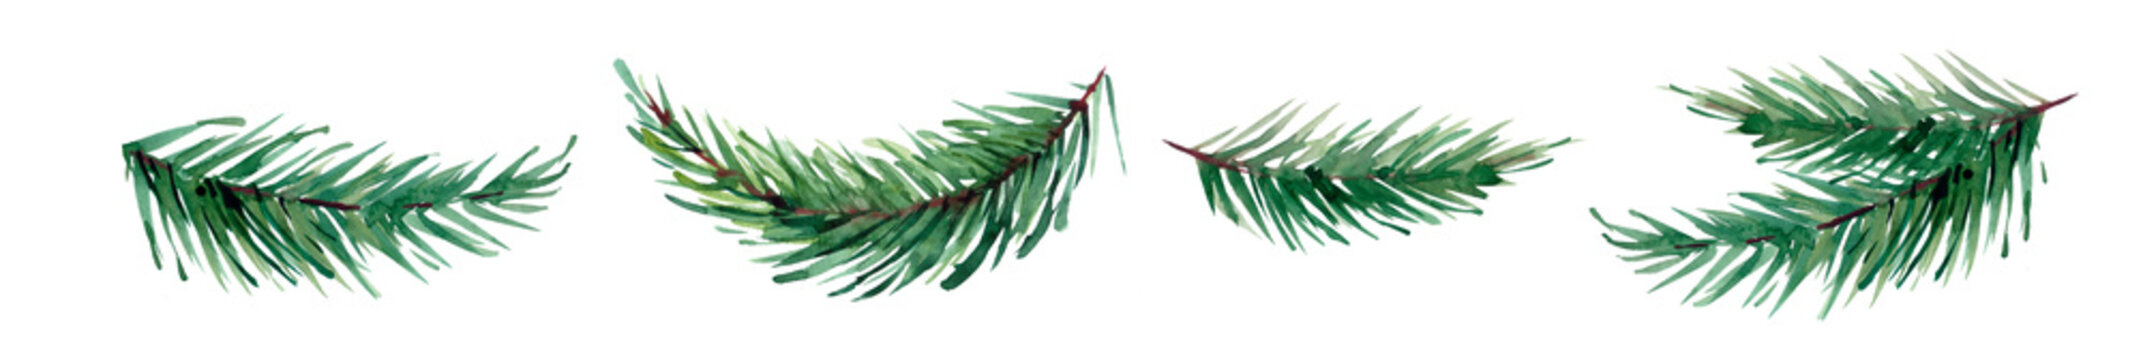 watercolor illustration of a branch of spruce, pine, fir-tree, isolated objects, plants, trees